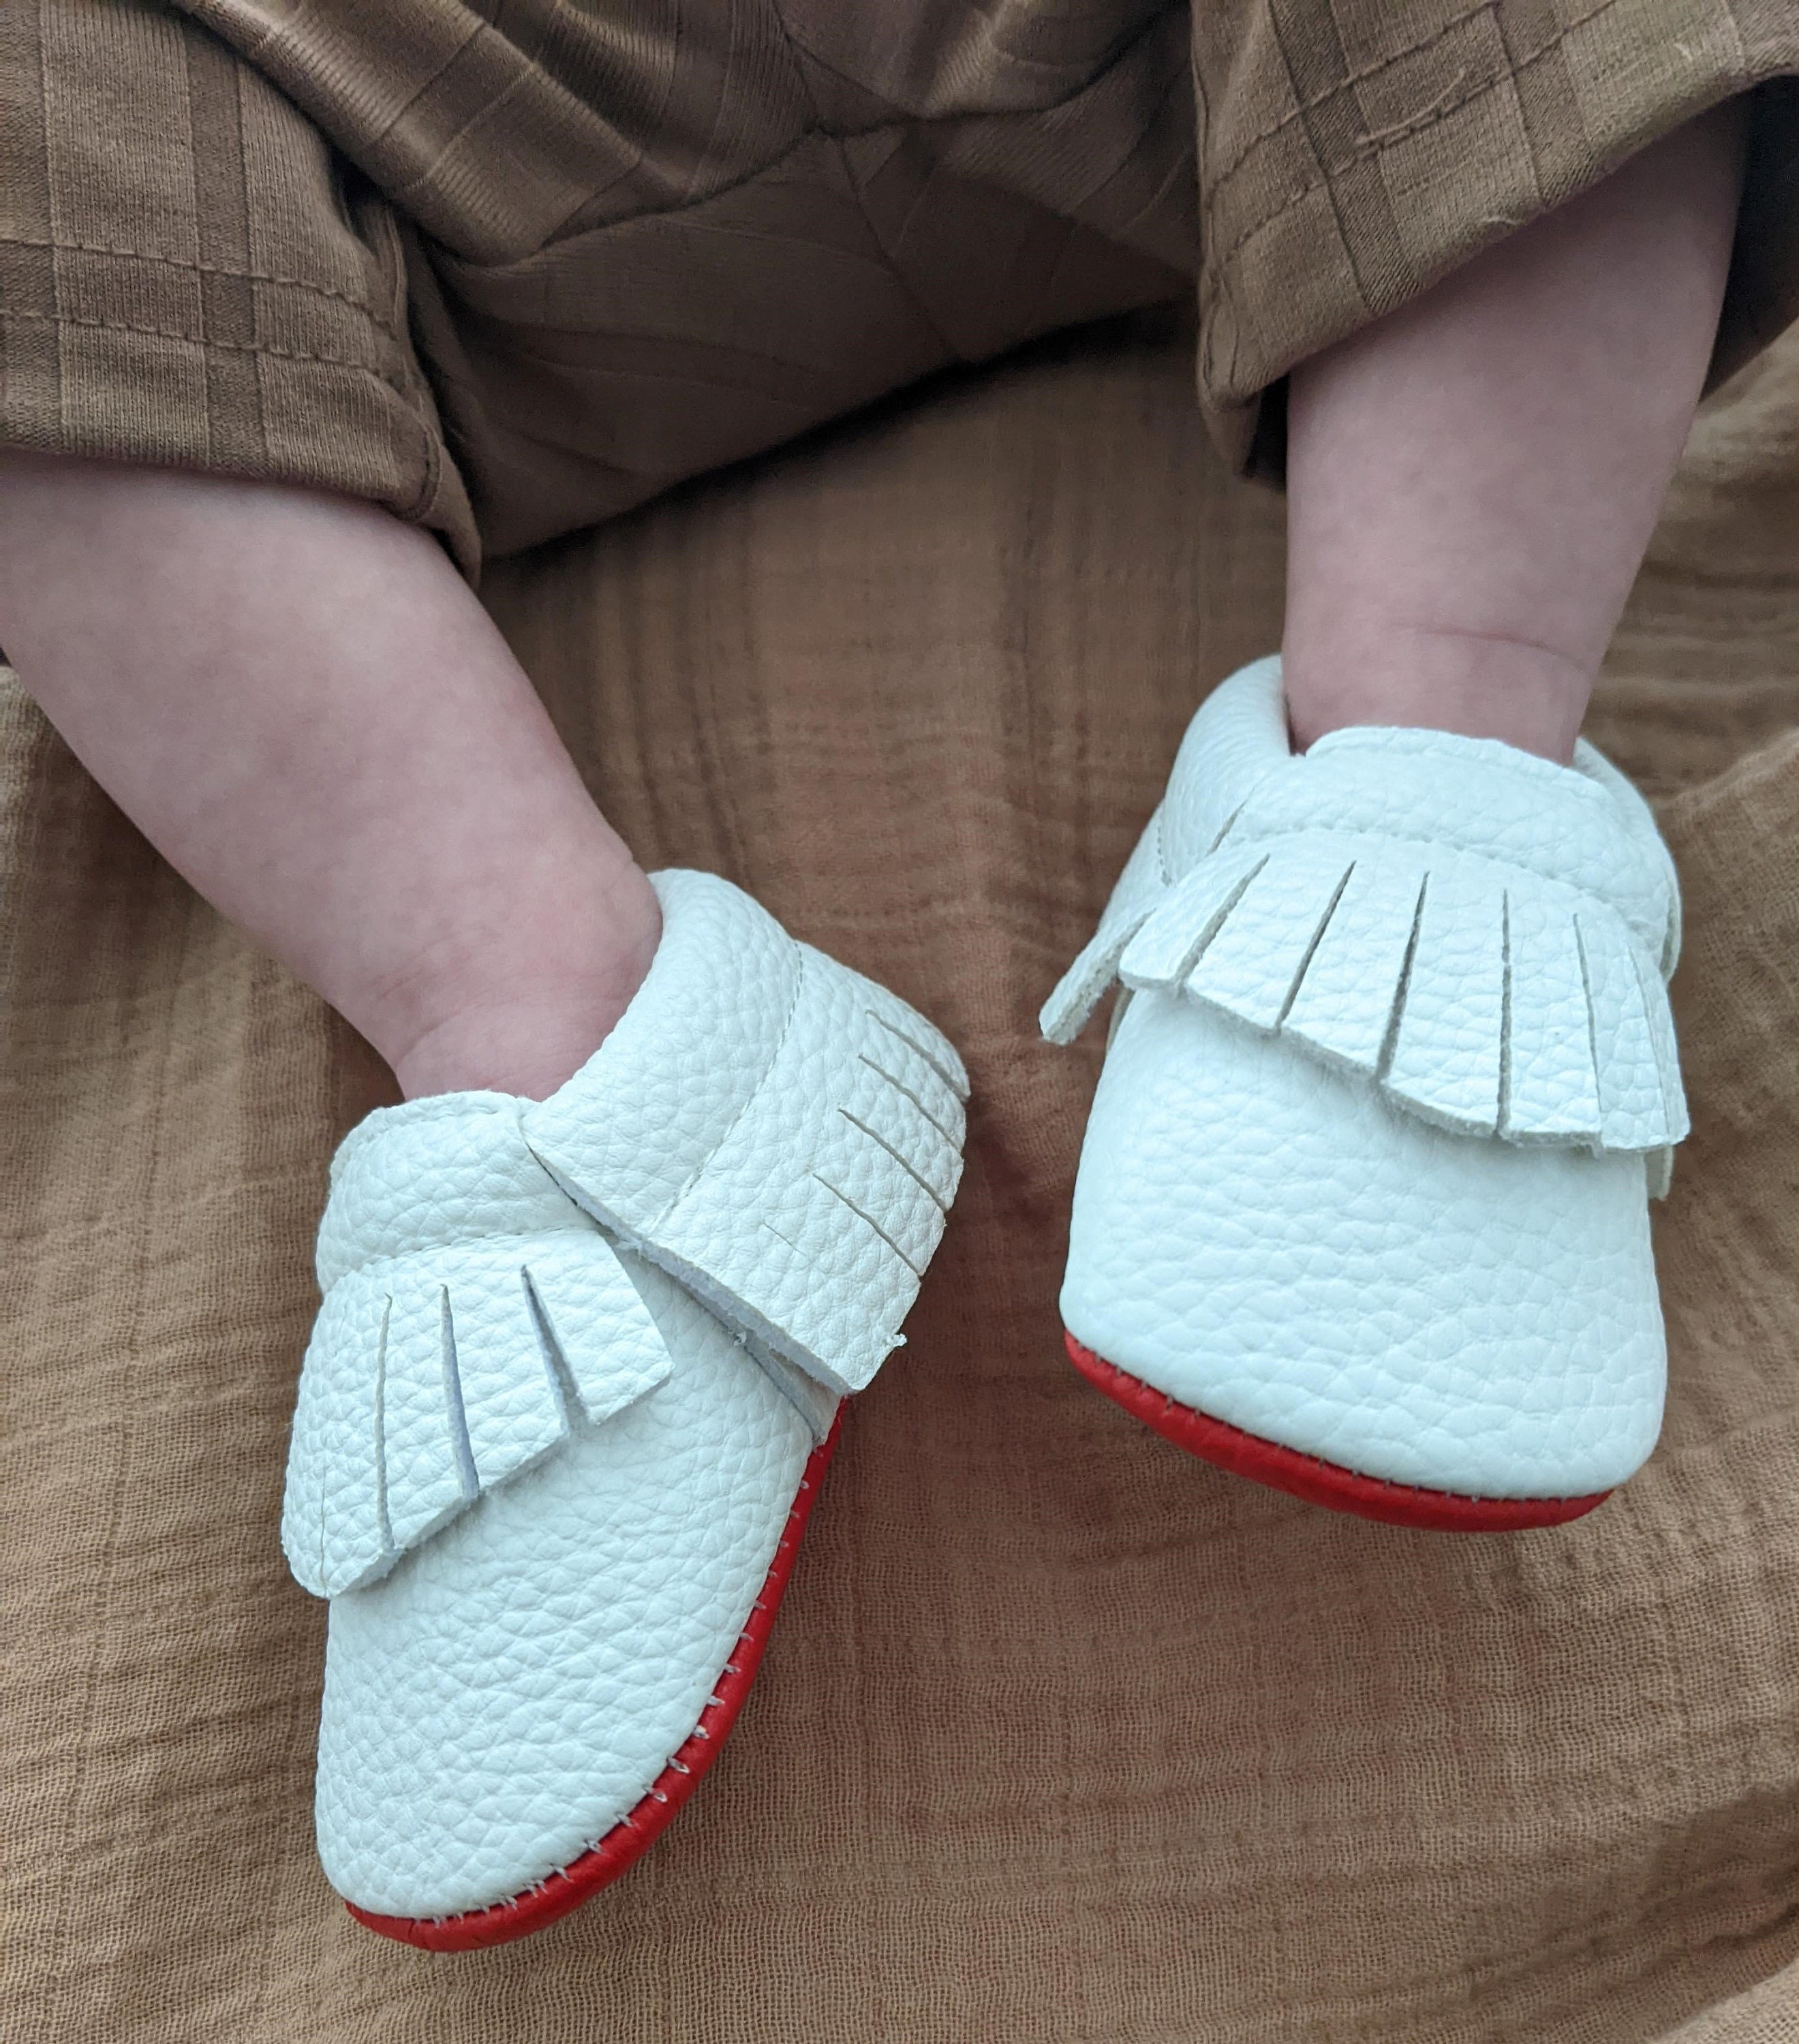 Schoenen Jongensschoenen Laarzen Personalized baby boy moccasins 18 to 24 months old. Toddler baby shoes Green and gray leather baby boy boots Hand sewn booties 